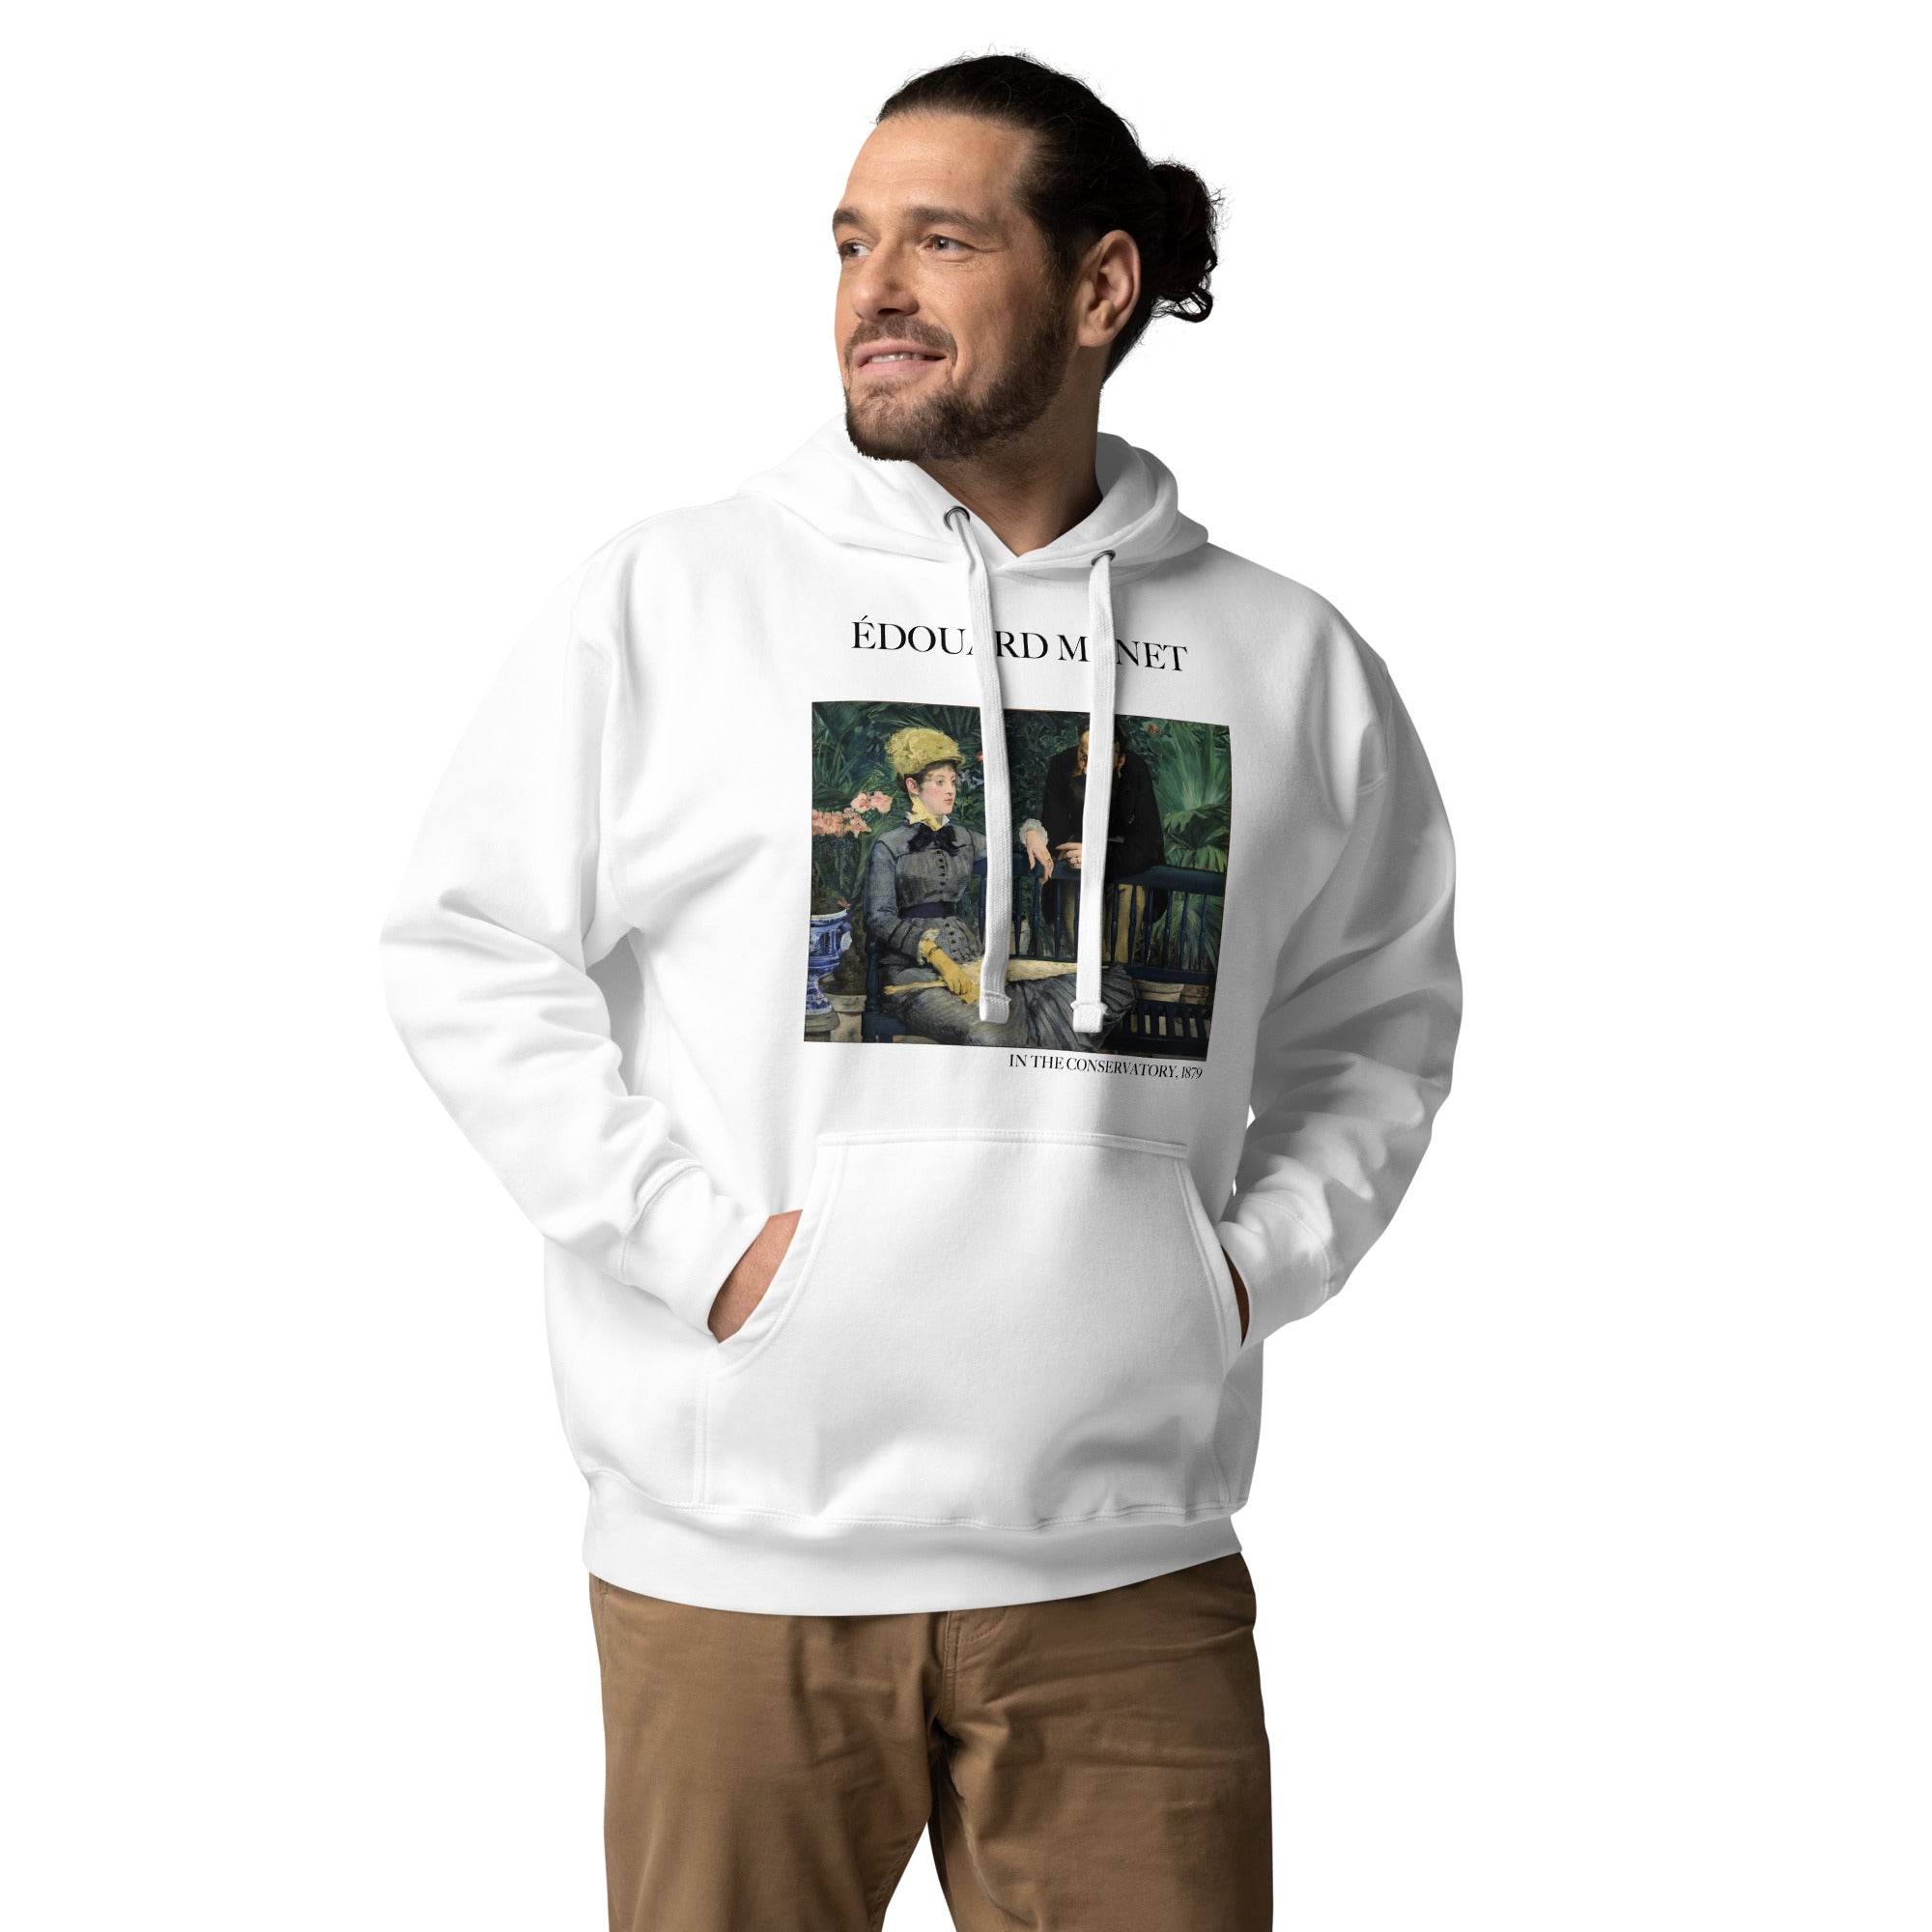 Édouard Manet 'In the Conservatory' Famous Painting Hoodie | Unisex Premium Art Hoodie